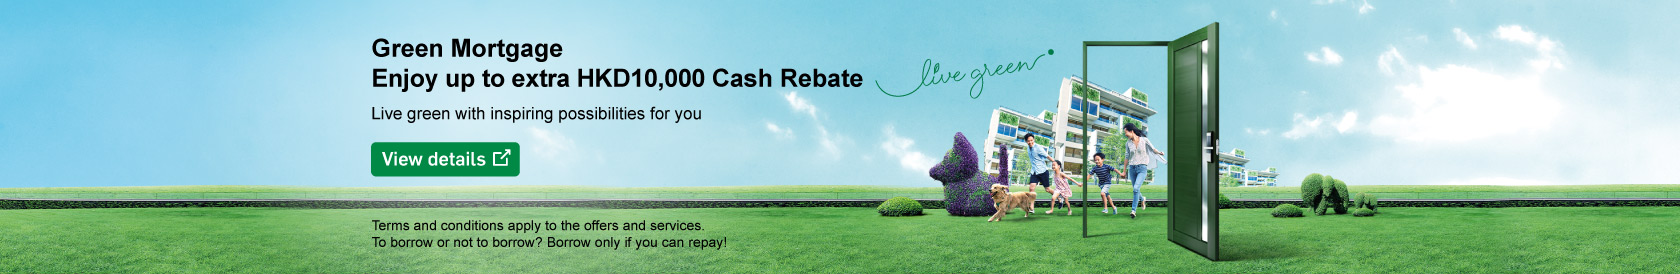 View details, Green Mortgage with up to extra HKD10,000 cash rebate (Opens in a new window)